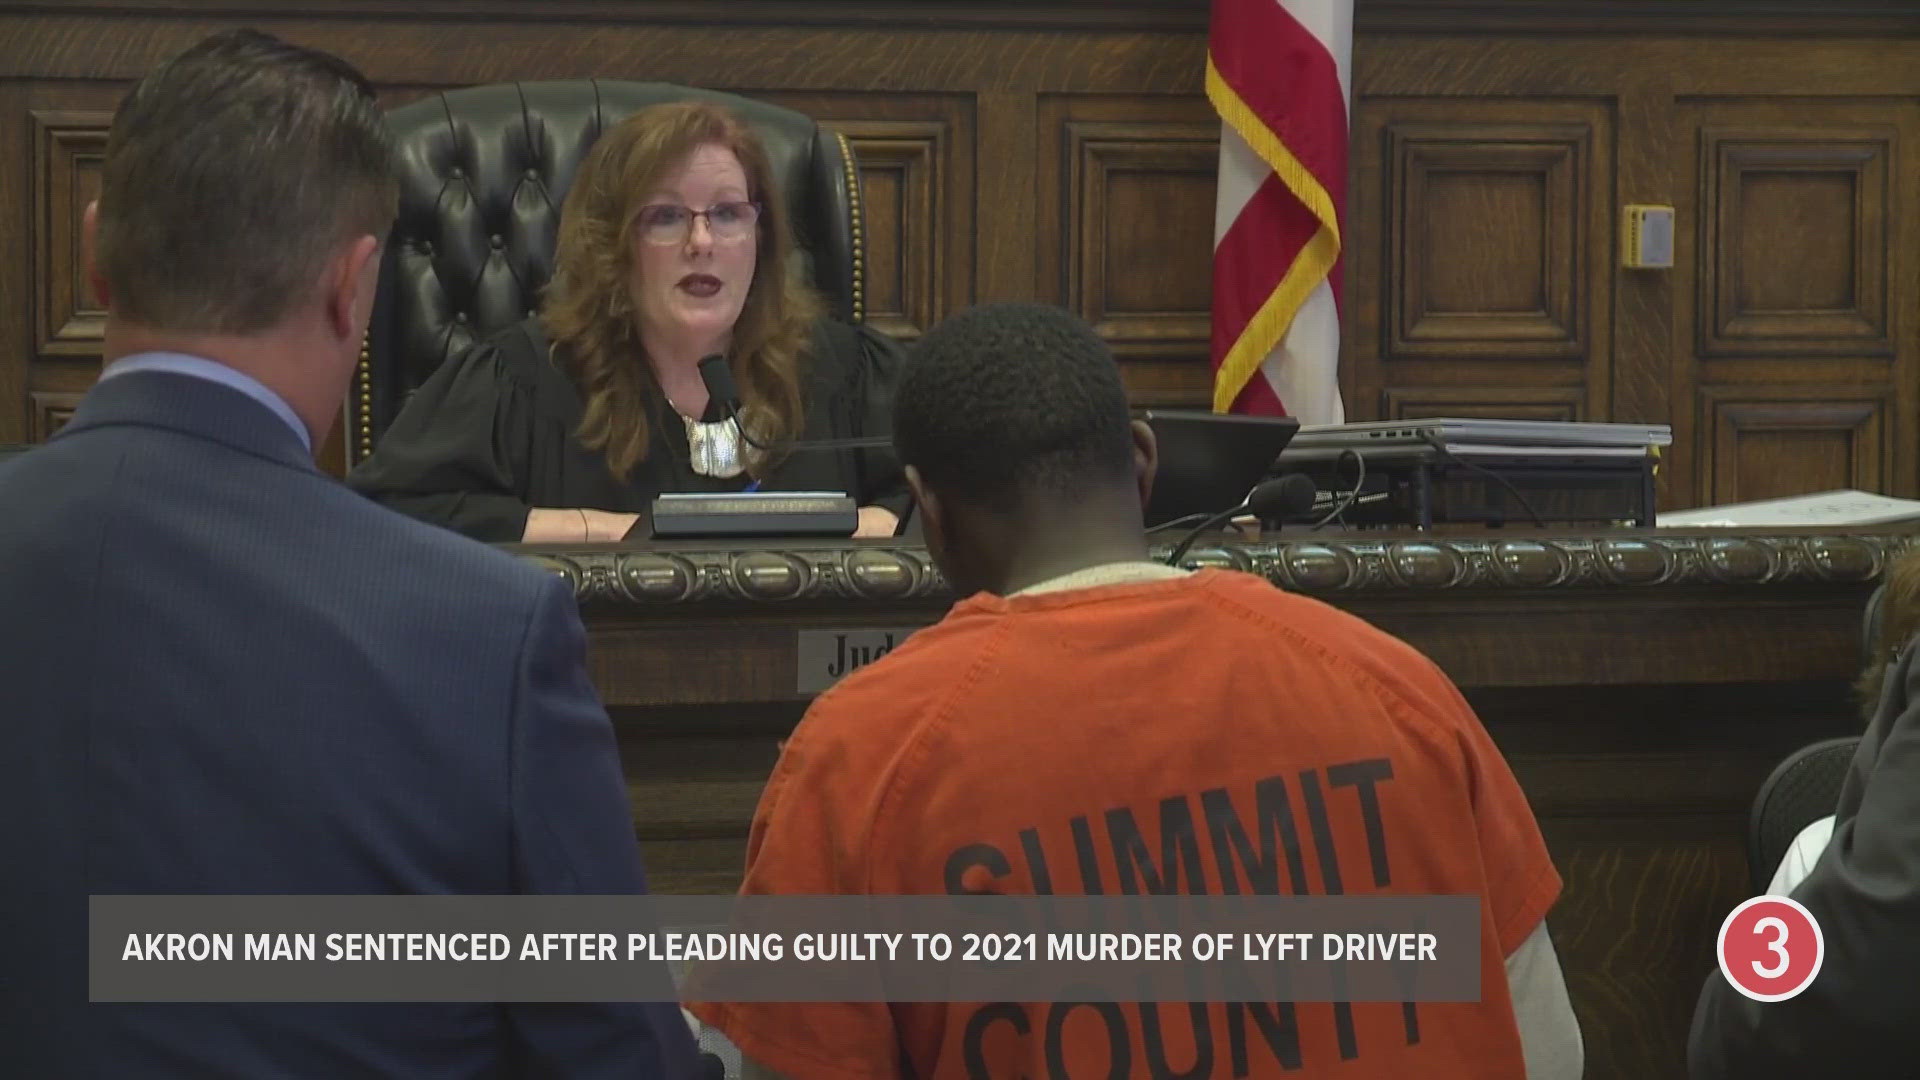 Kahlyl Powe was sentenced to life in prison, with the possibility of parole after 19 years, for the 2021 murder of Kristopher Roukey.